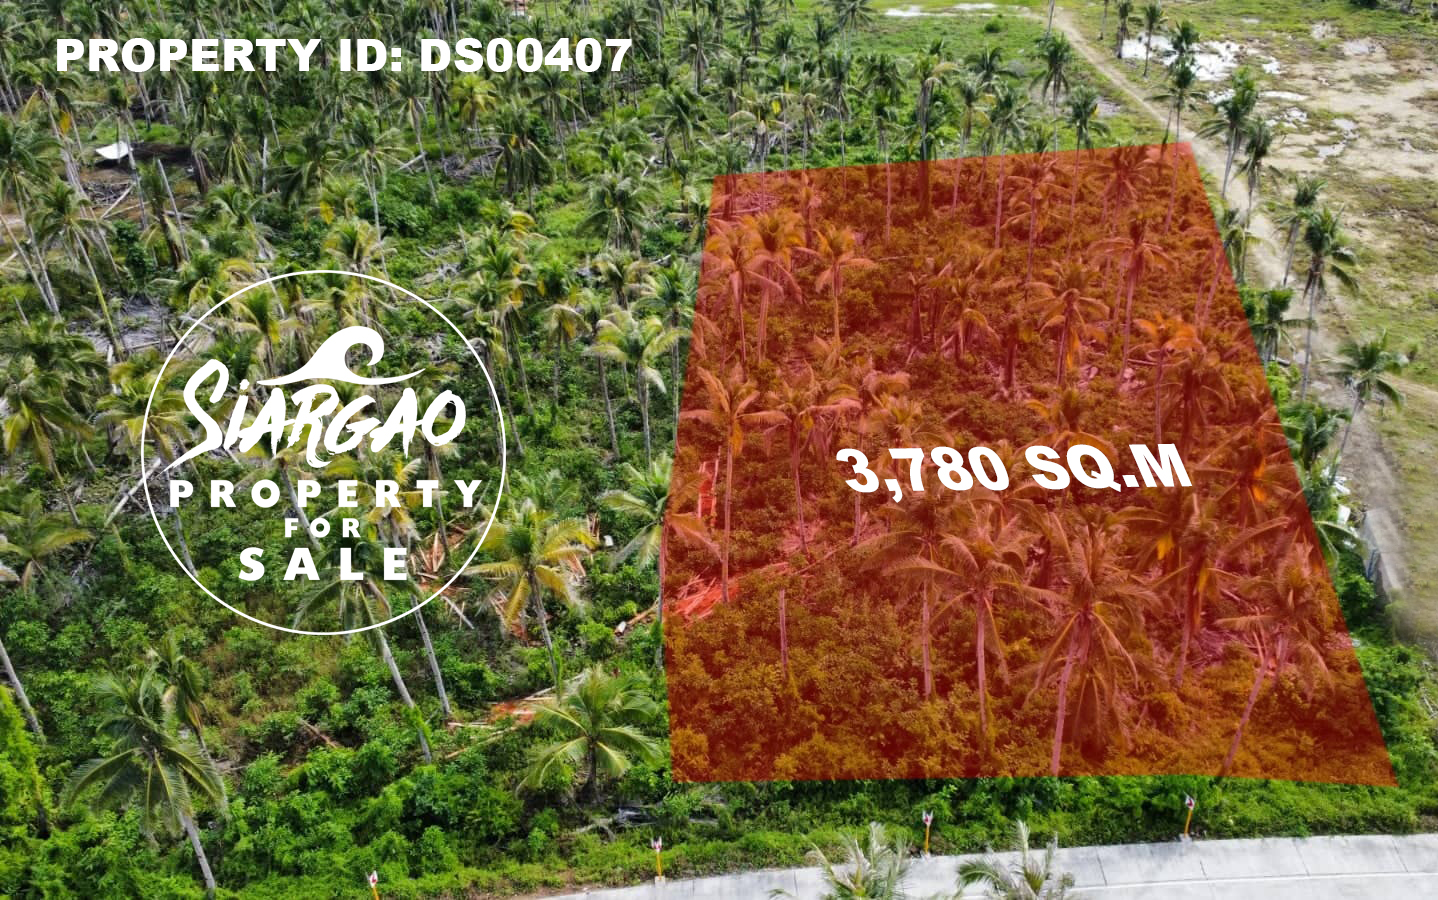 3,780 SQM Vacant Lot For Sale Along the road in General Luna Siargao